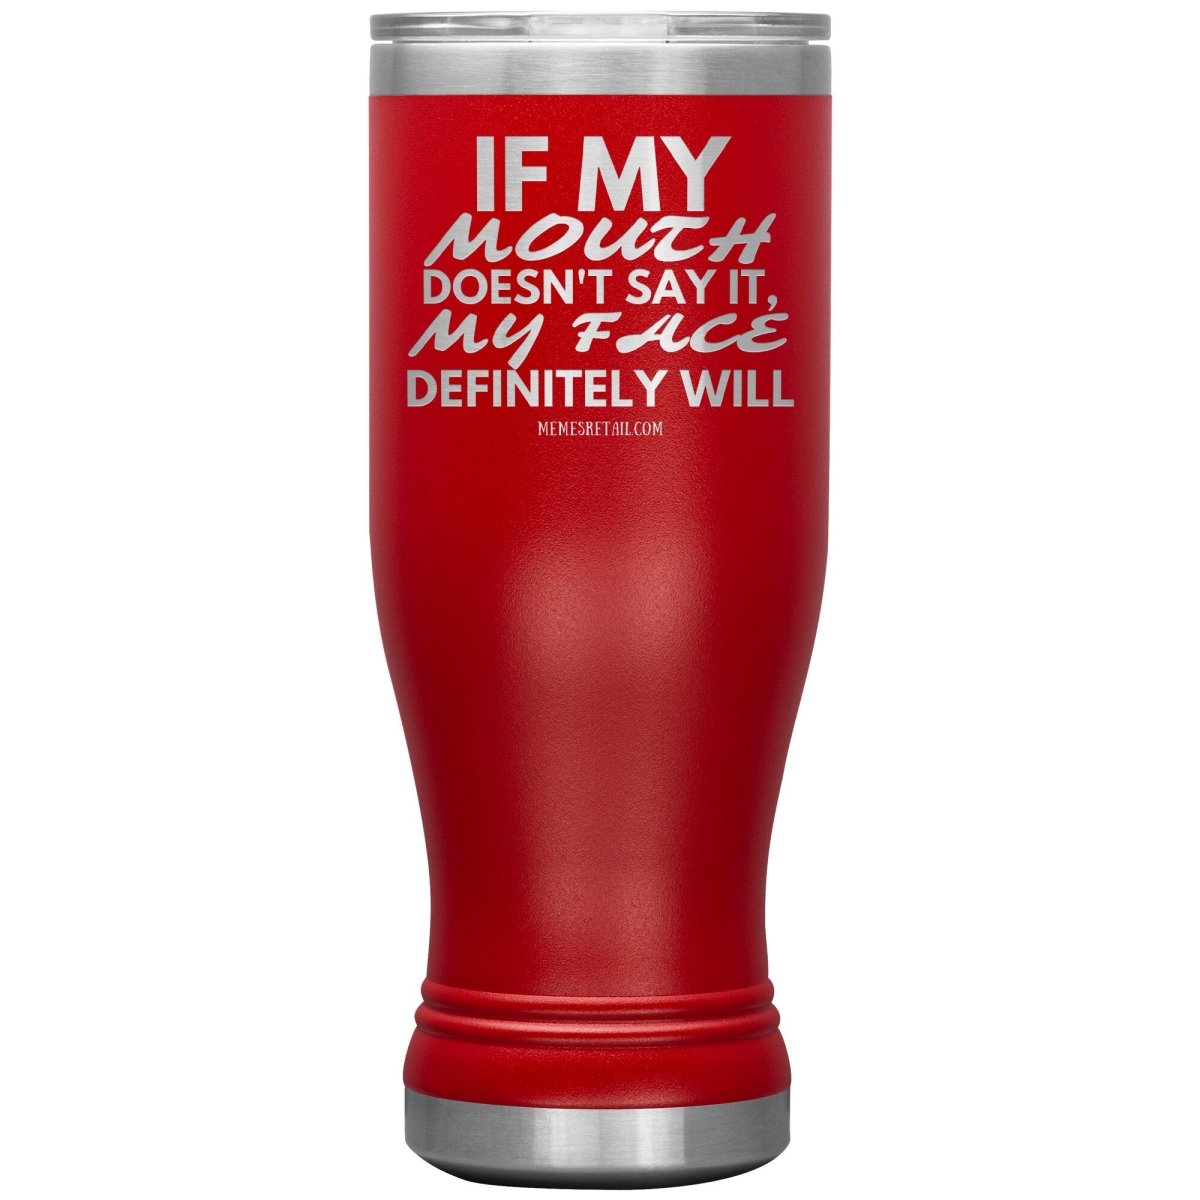 If my mouth doesn't say it, my face definitely will Tumblers, 20oz BOHO Insulated Tumbler / Red - MemesRetail.com